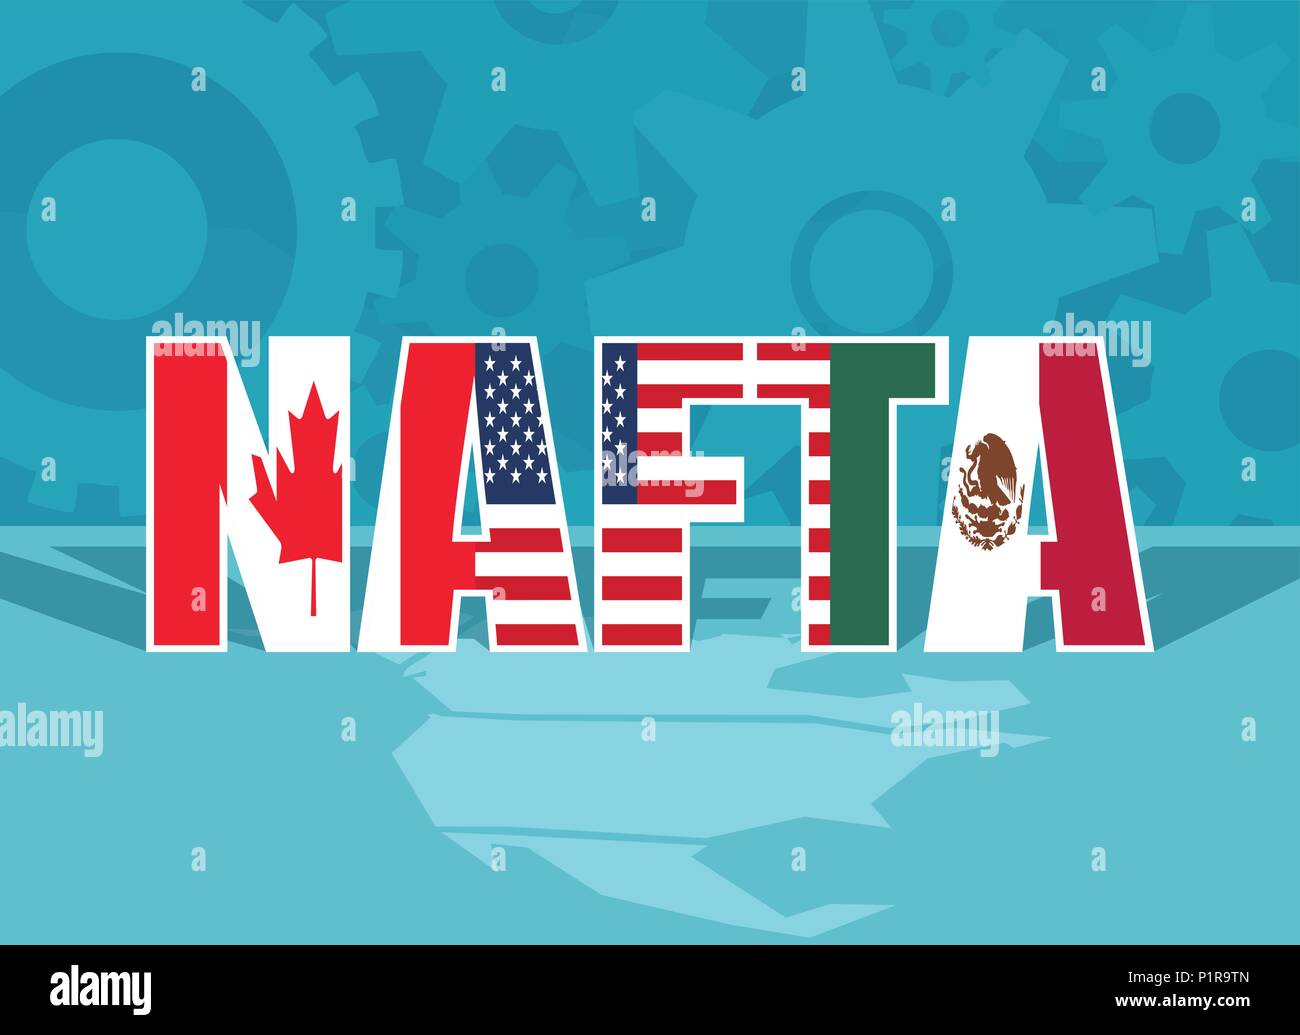 Colorful flat design of abbreviation for North American Free Trade Agreement. Stock Vector